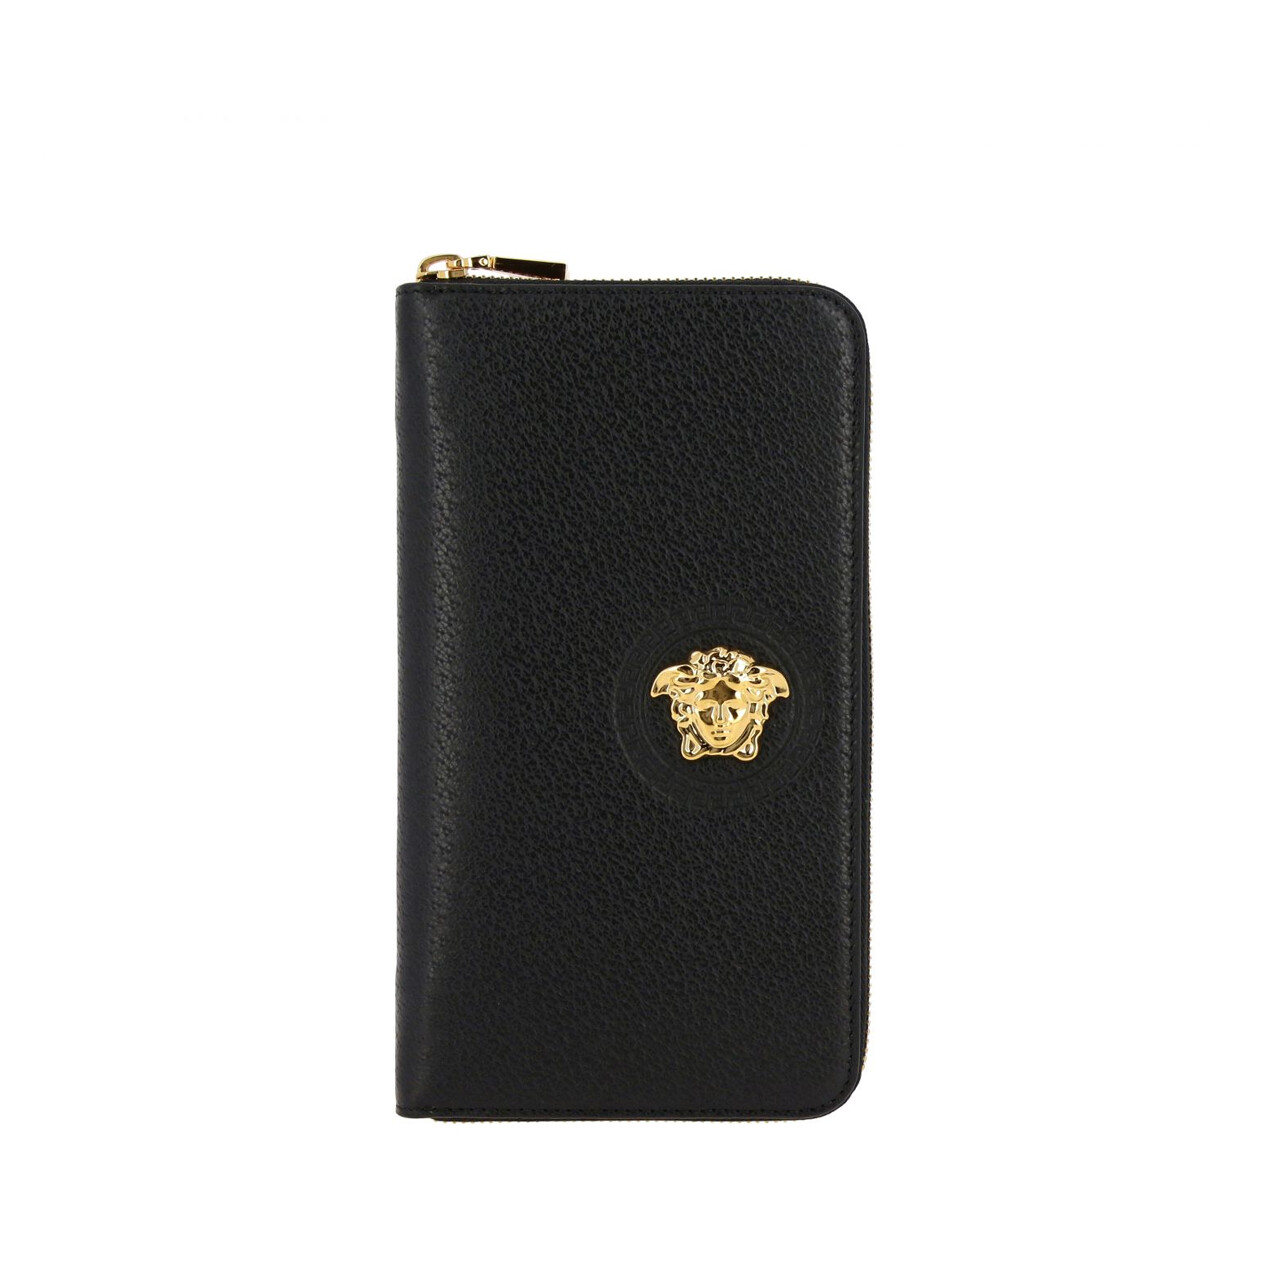 Buy Versace MenS Brown Leather Wallet at Amazonin